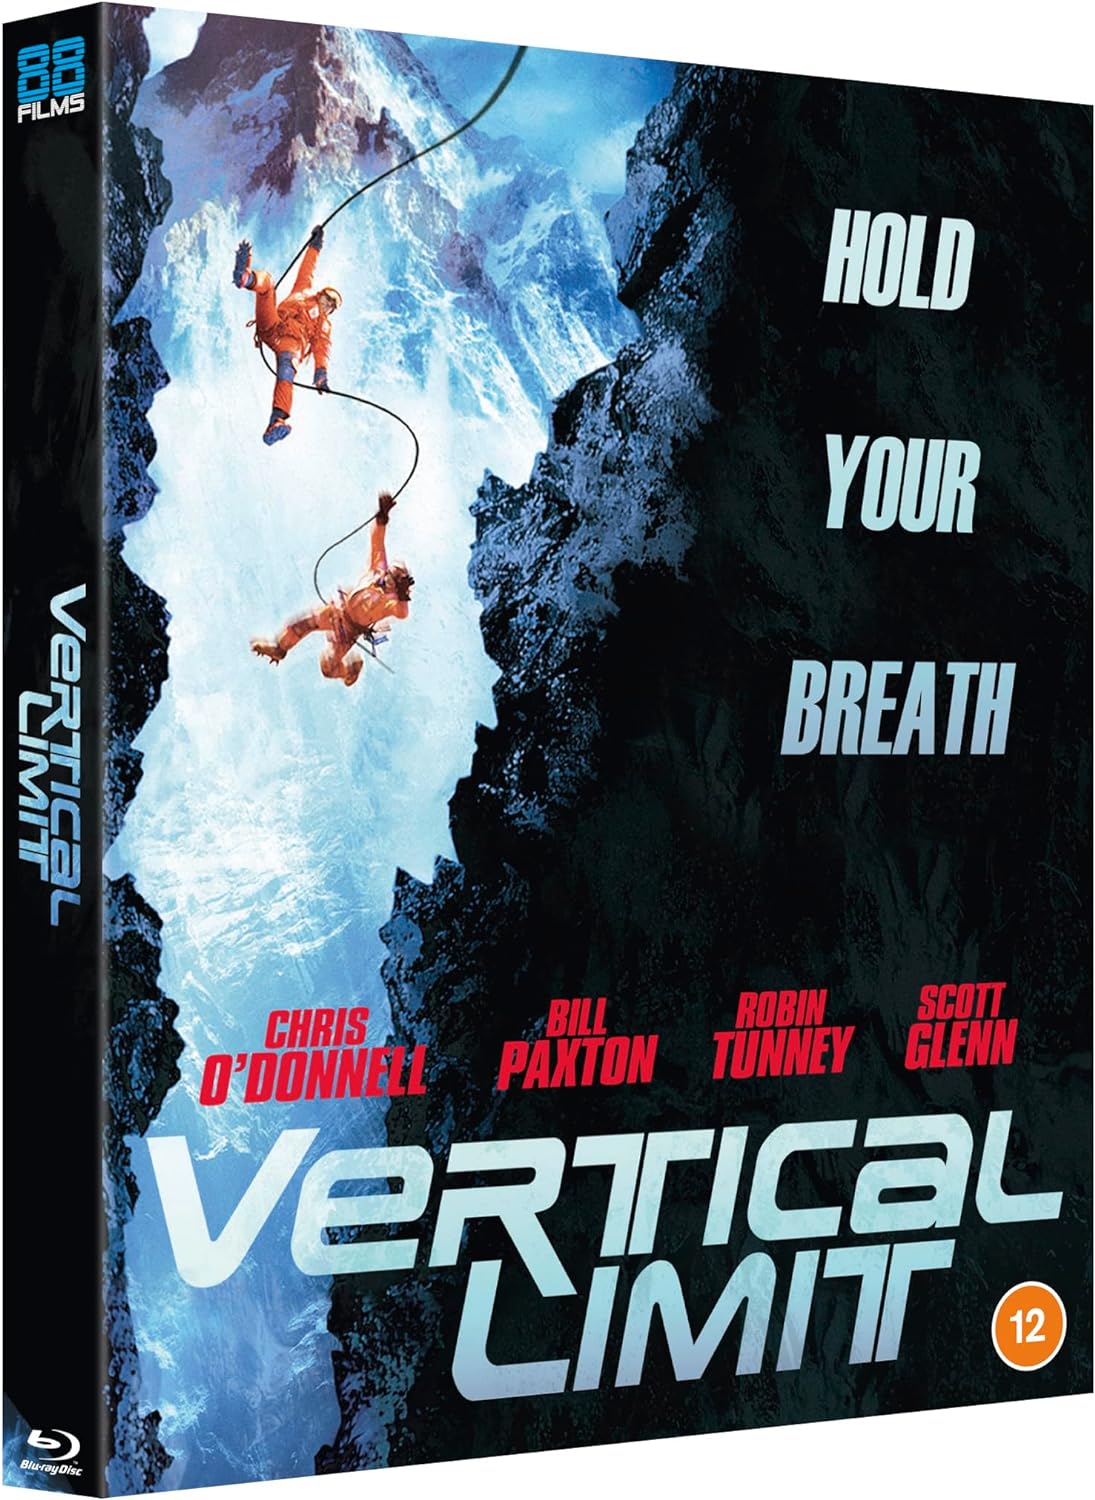 Vertical Limit Blu-ray with Slipcover (88 Films/Region B) [Preorder]